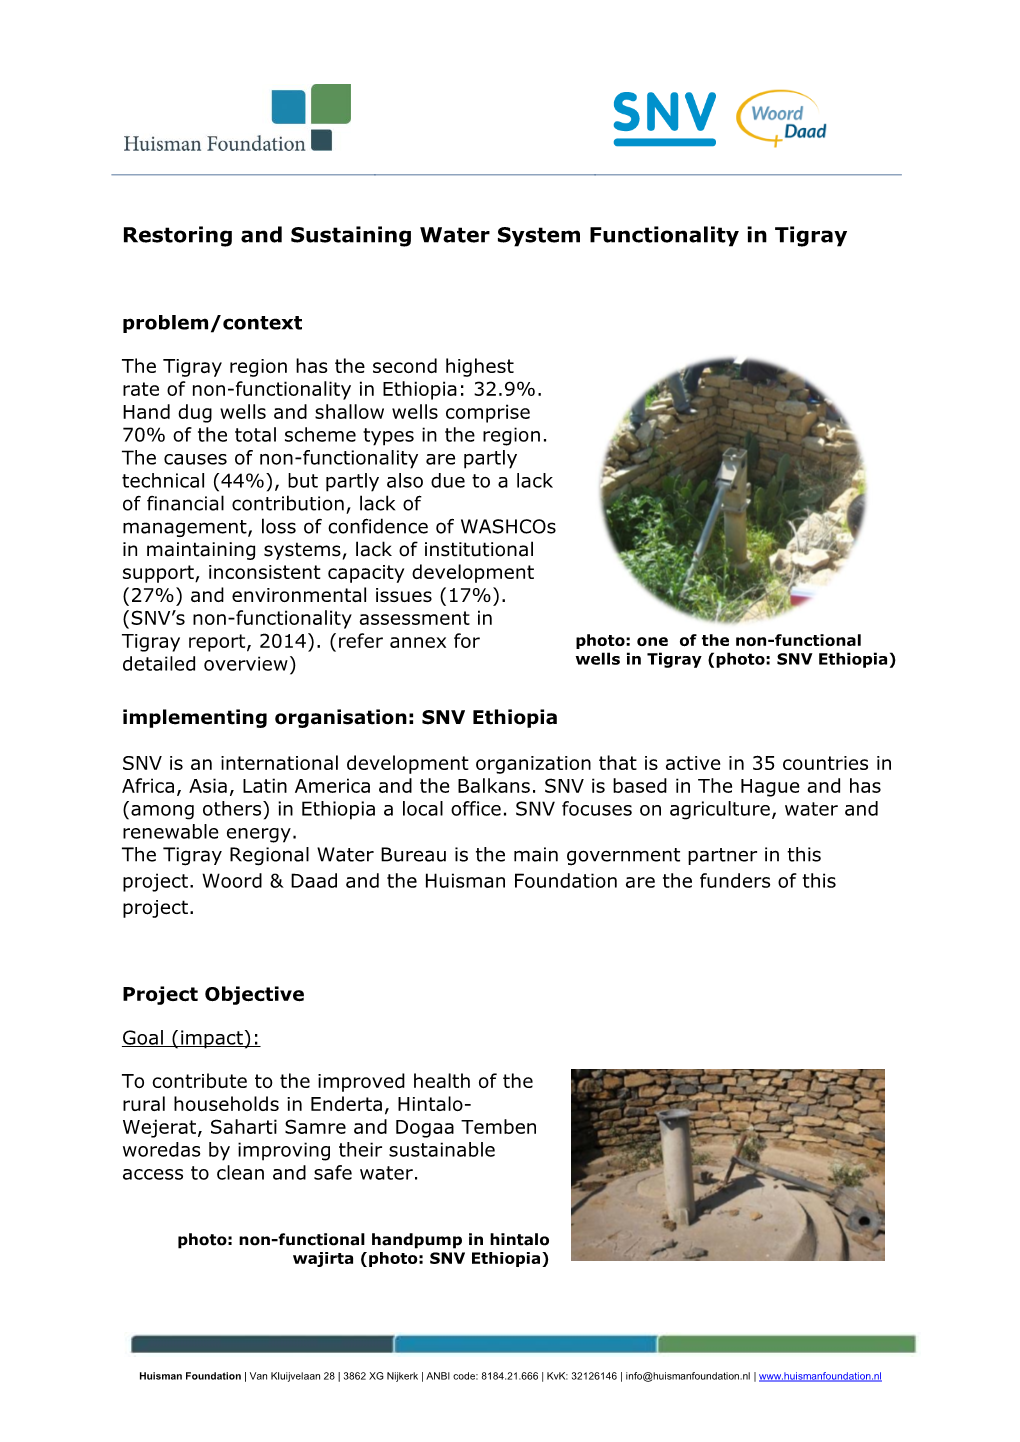 Restoring and Sustaining Water System Functionality in Tigray